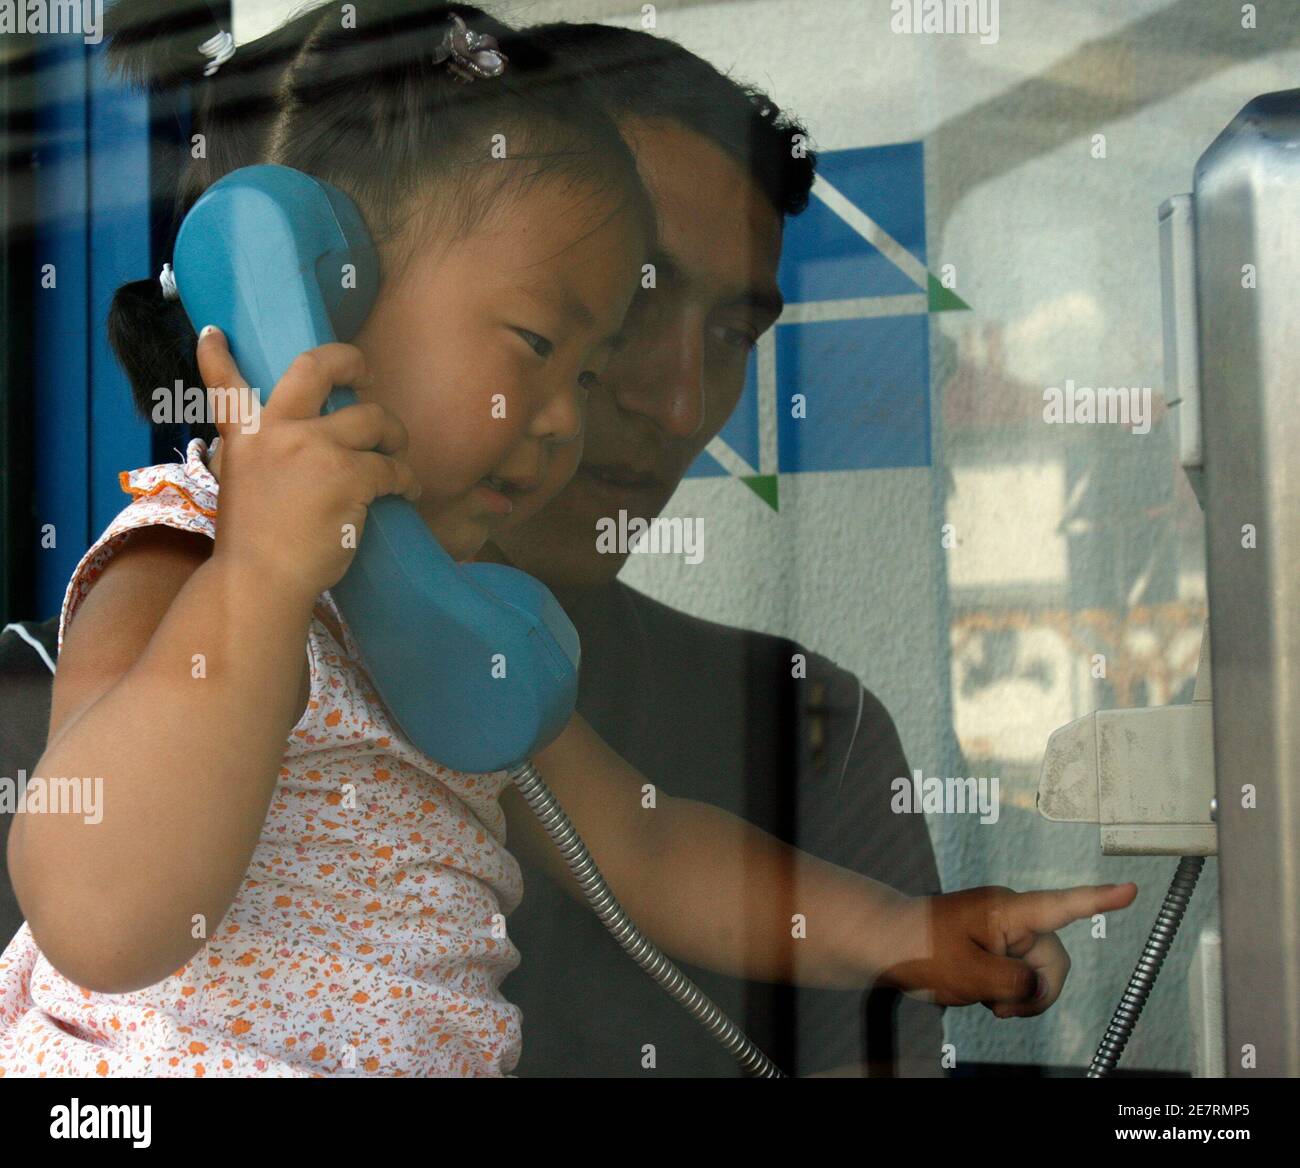 A Mongolian refugee girl uses a public phone with her relative at the Reception Centre for Asylum Seekers in Bekescsaba, 220 km (137 miles) southeast of Budapest, June 4, 2007. Hungary will join the European Union Schengen border patrol agreement on January 1, 2008, and will become EU's primary border for refugee control. The Schengen regime allows free movement of people within the EU, without border controls, and creates a unified external frontier, where police, customs and health checks are rigorous. The Word Refugee Day will held on June 20. REUTERS/Laszlo Balogh (HUNGARY) Stock Photo